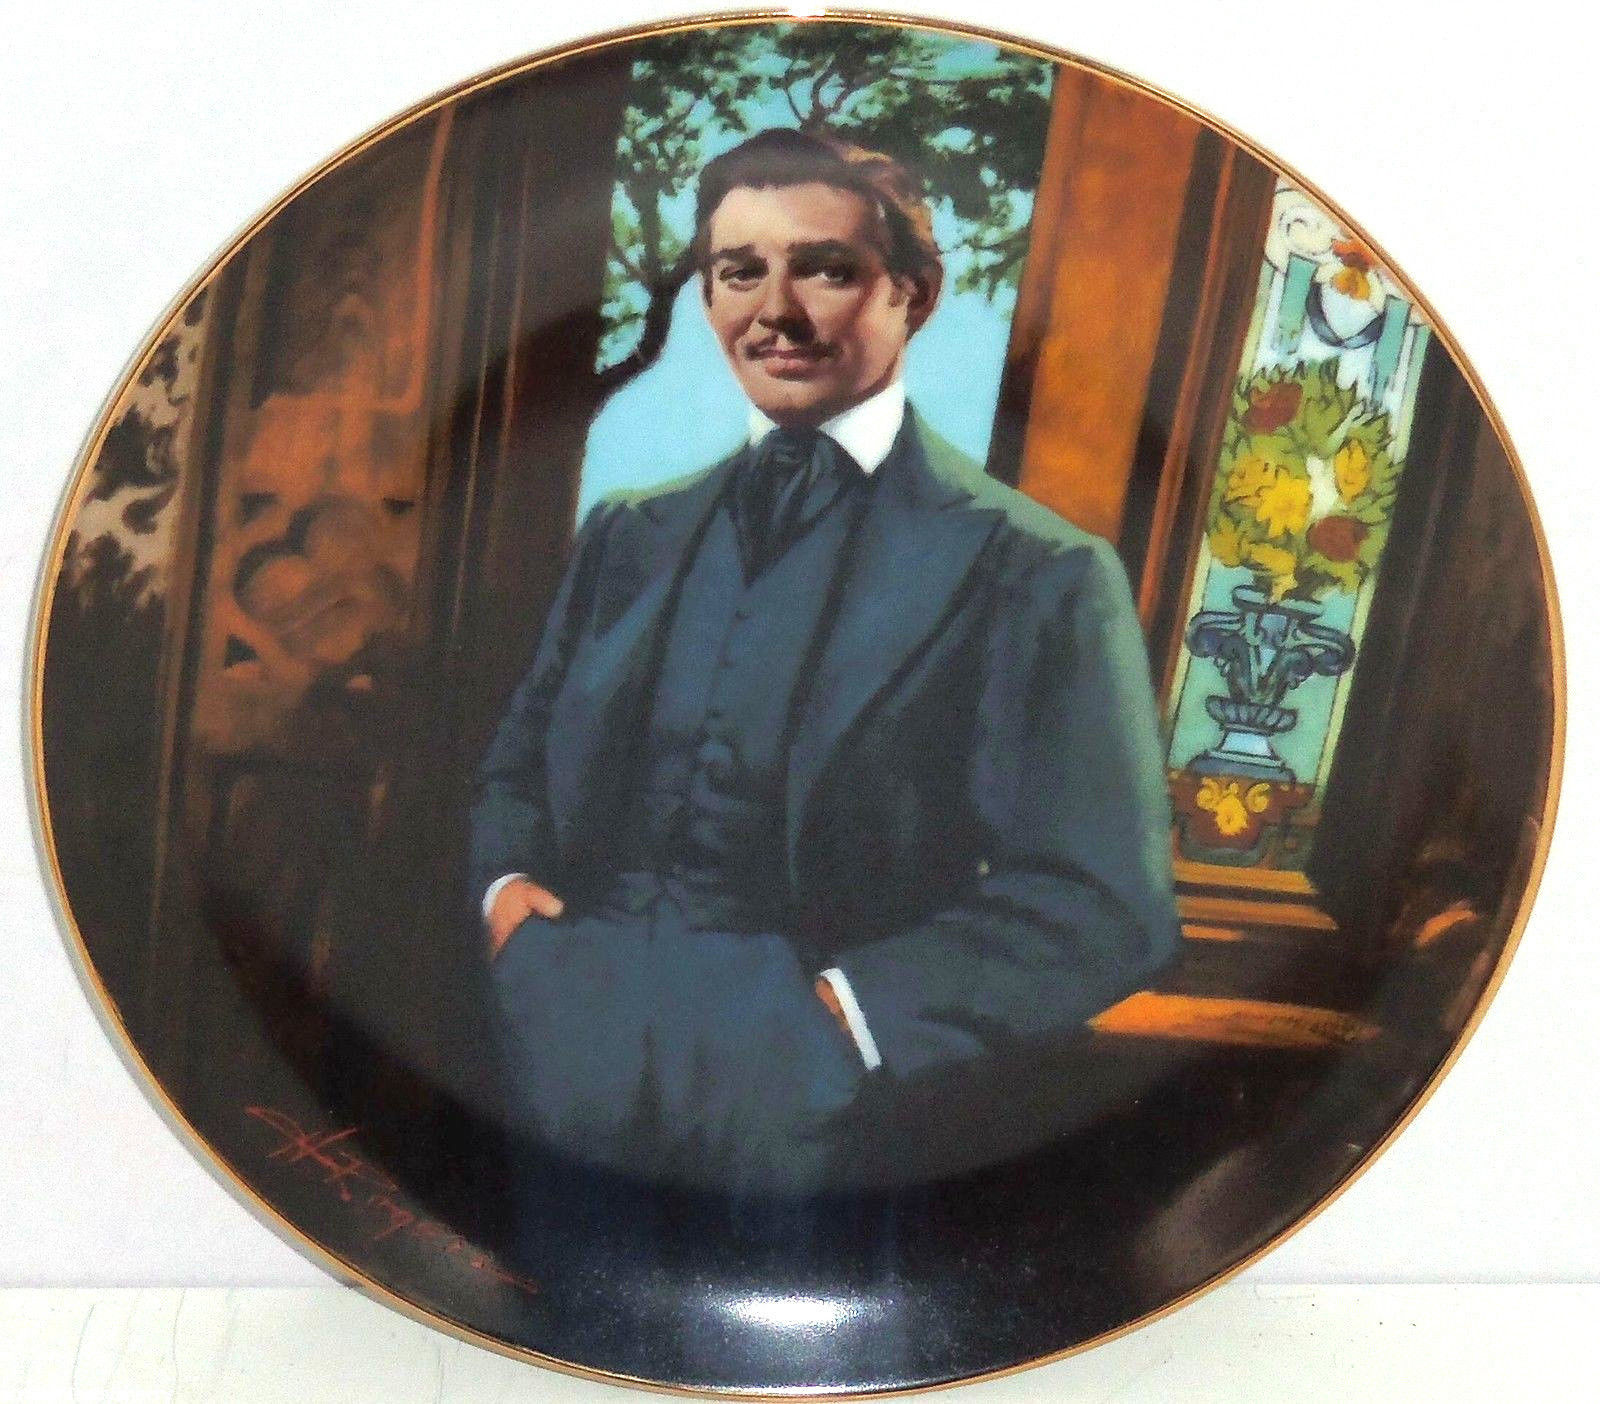 Primary image for Gone with the Wind Collectors Plate Frankly My Dear Bradford Exchange Vintage